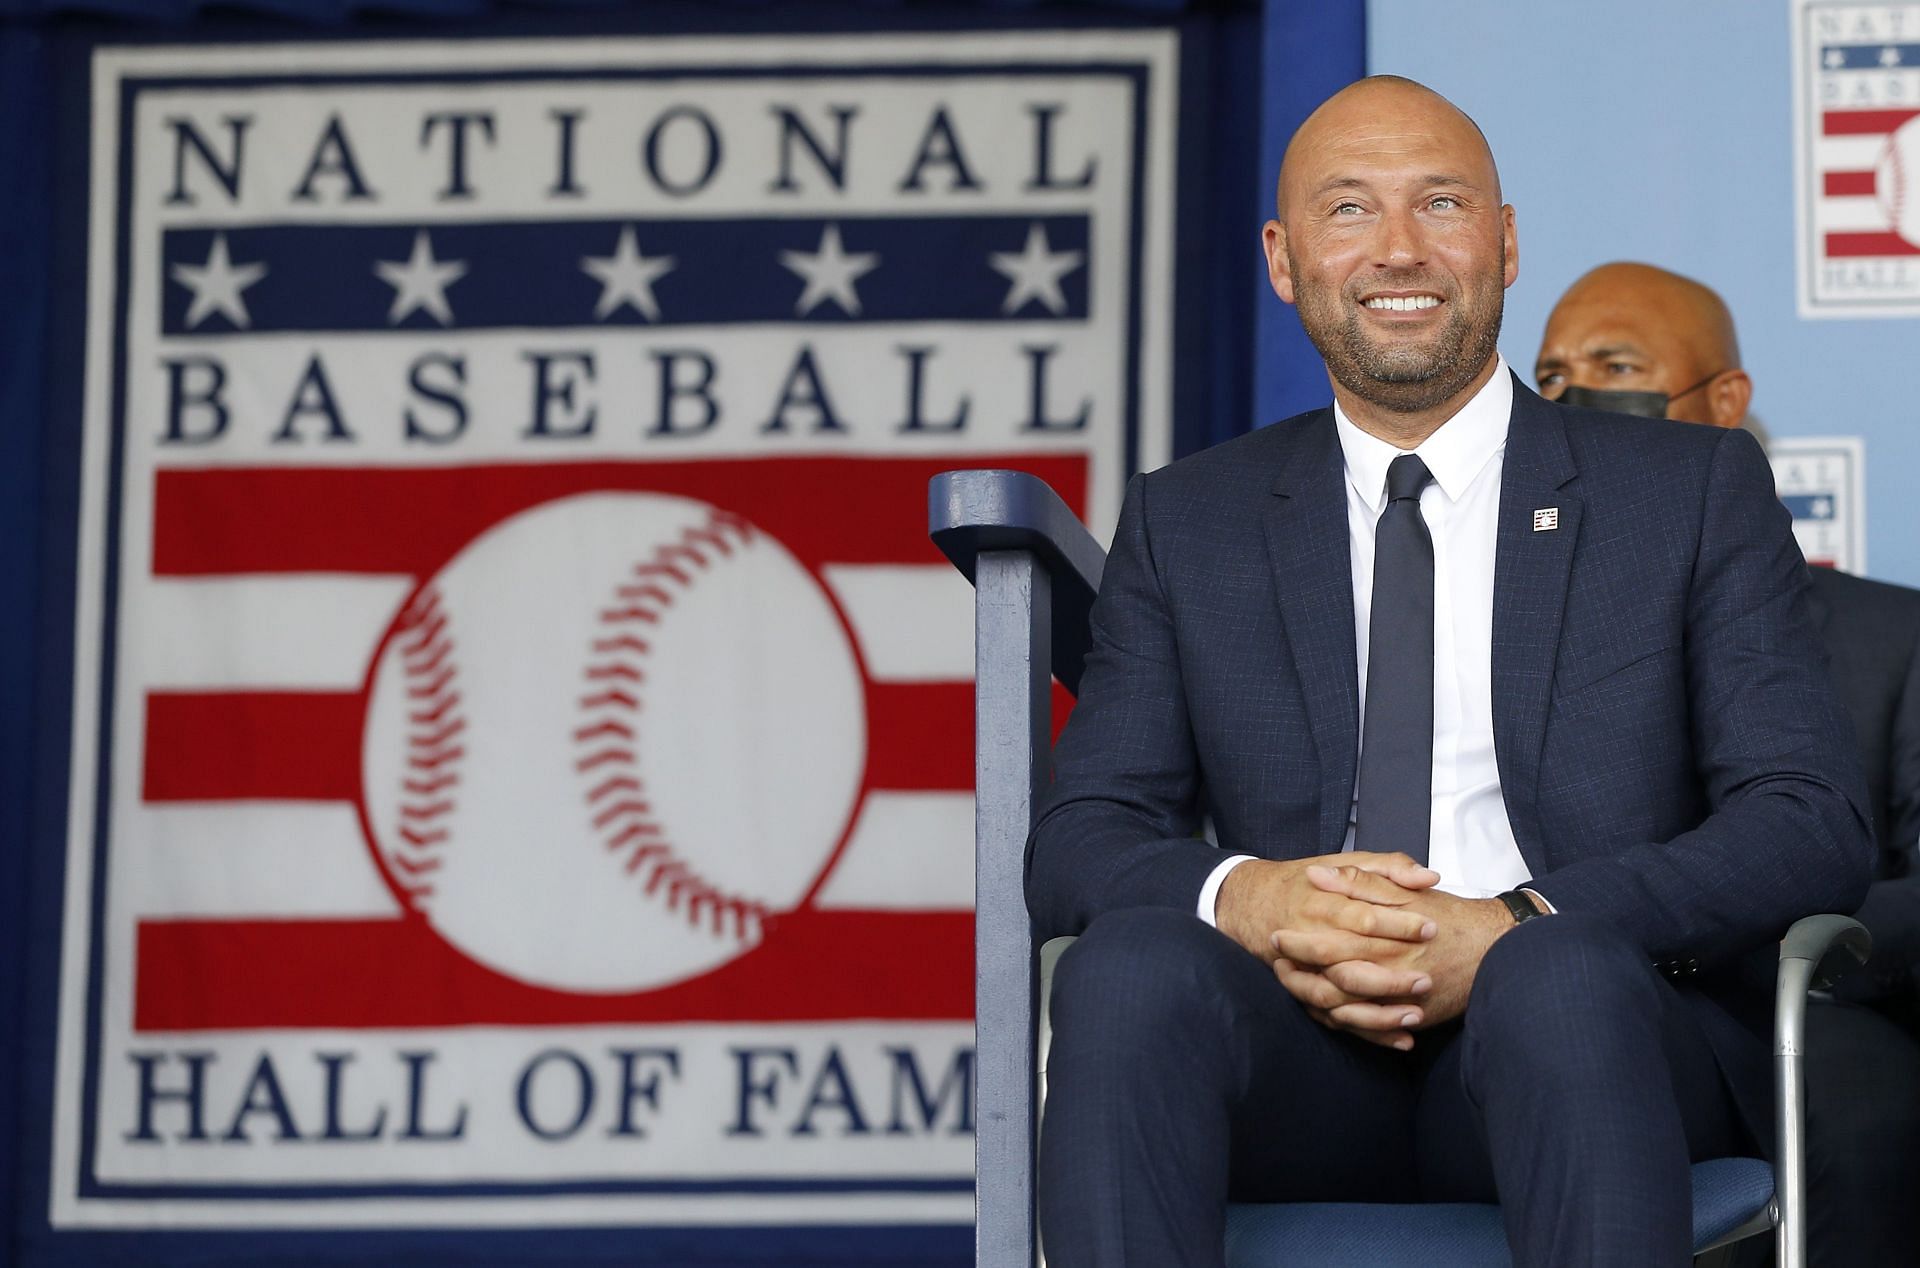 Derek Jeter spent his entire career with the Yankees in the MLB